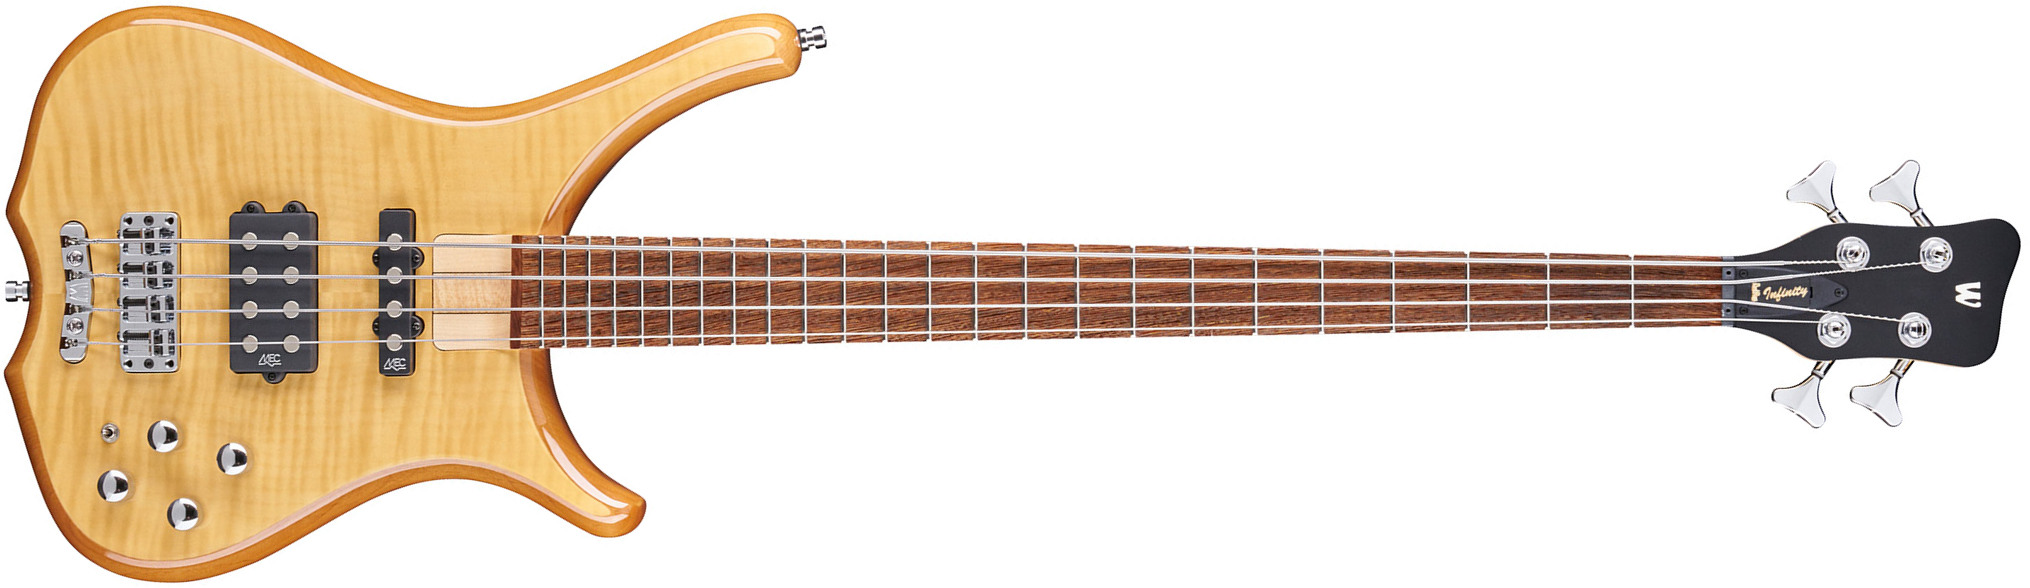 Warwick Infinity 4c Rockbass Active Wen - Natural - Solid body electric bass - Main picture